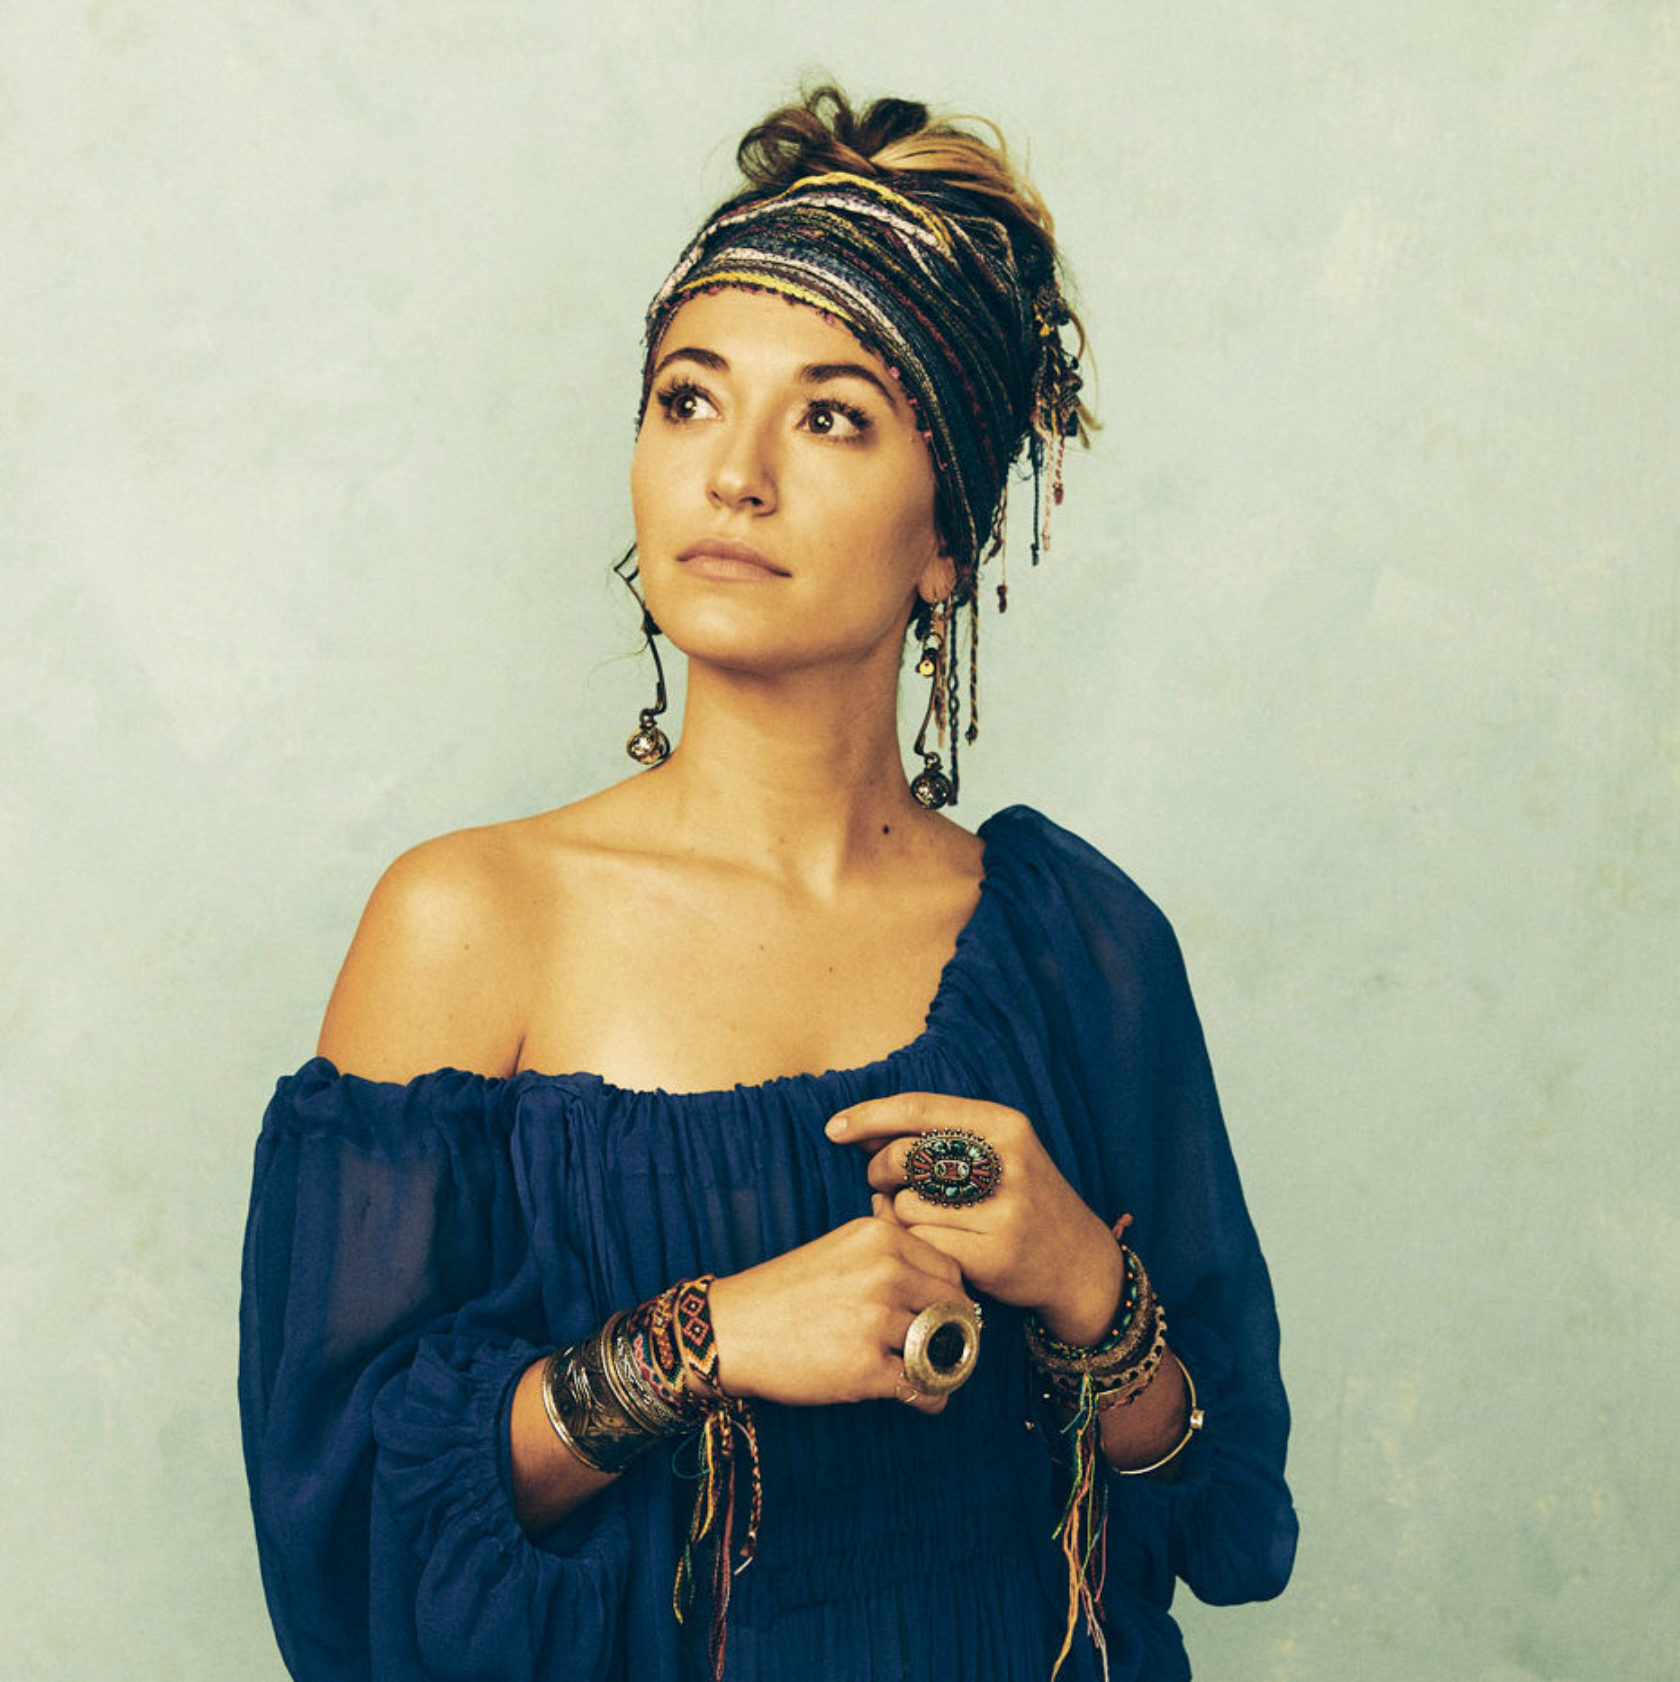 Lauren Daigle on the BOOST Morning Show